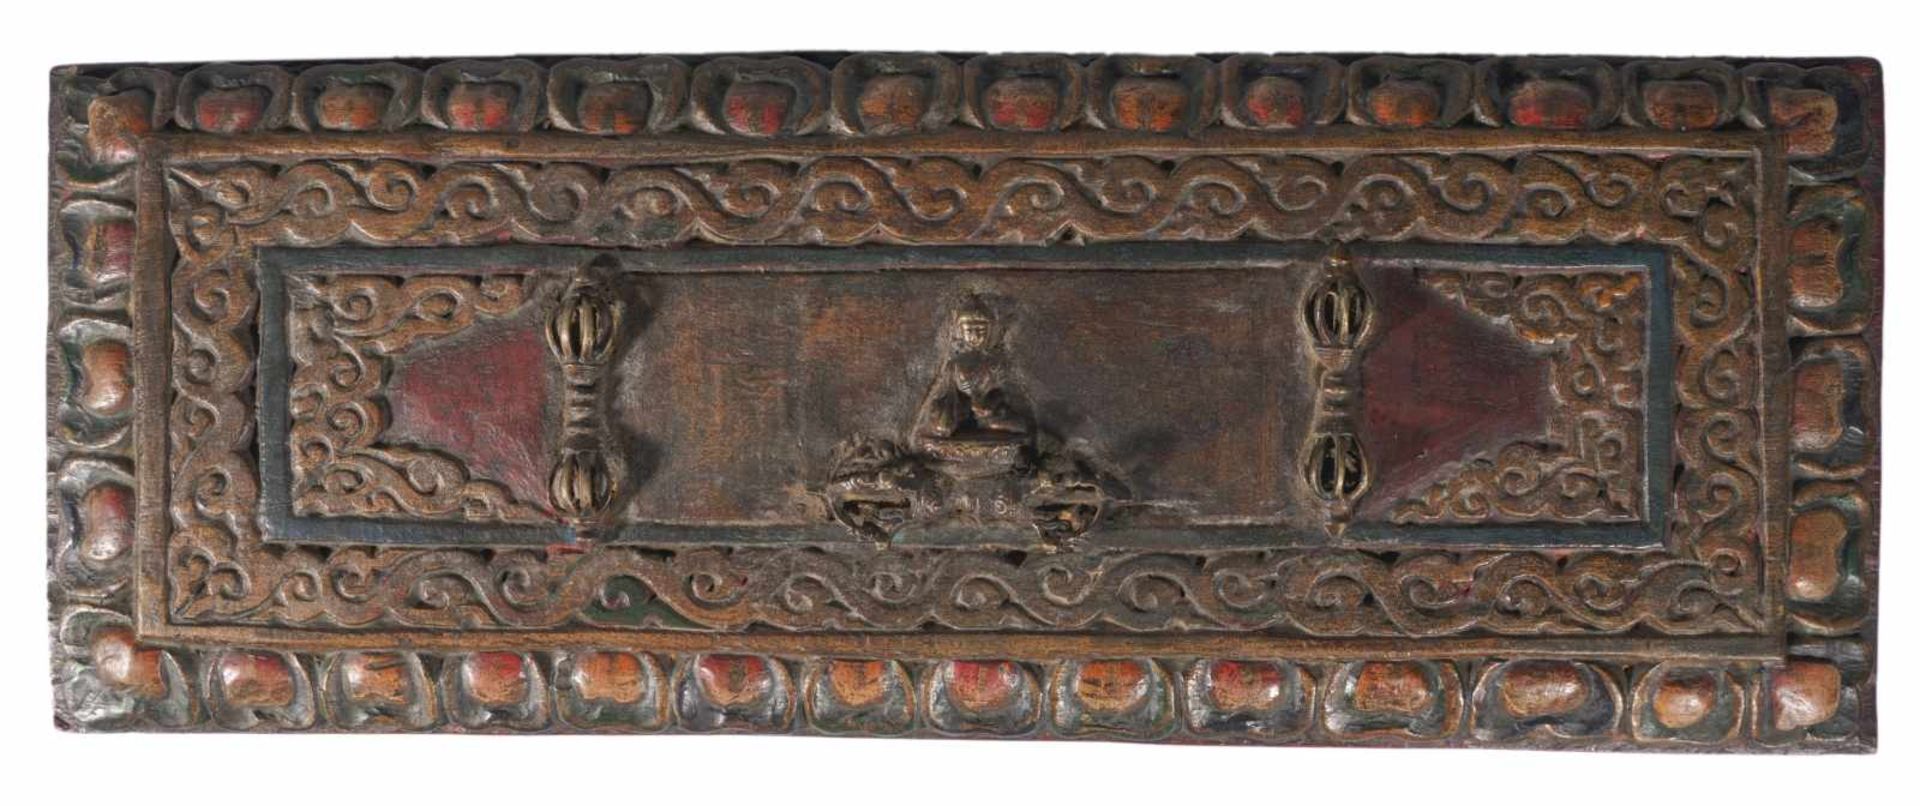 A Buddhist manuscript between two elaborately designed book covers made of wood and with - Bild 2 aus 2